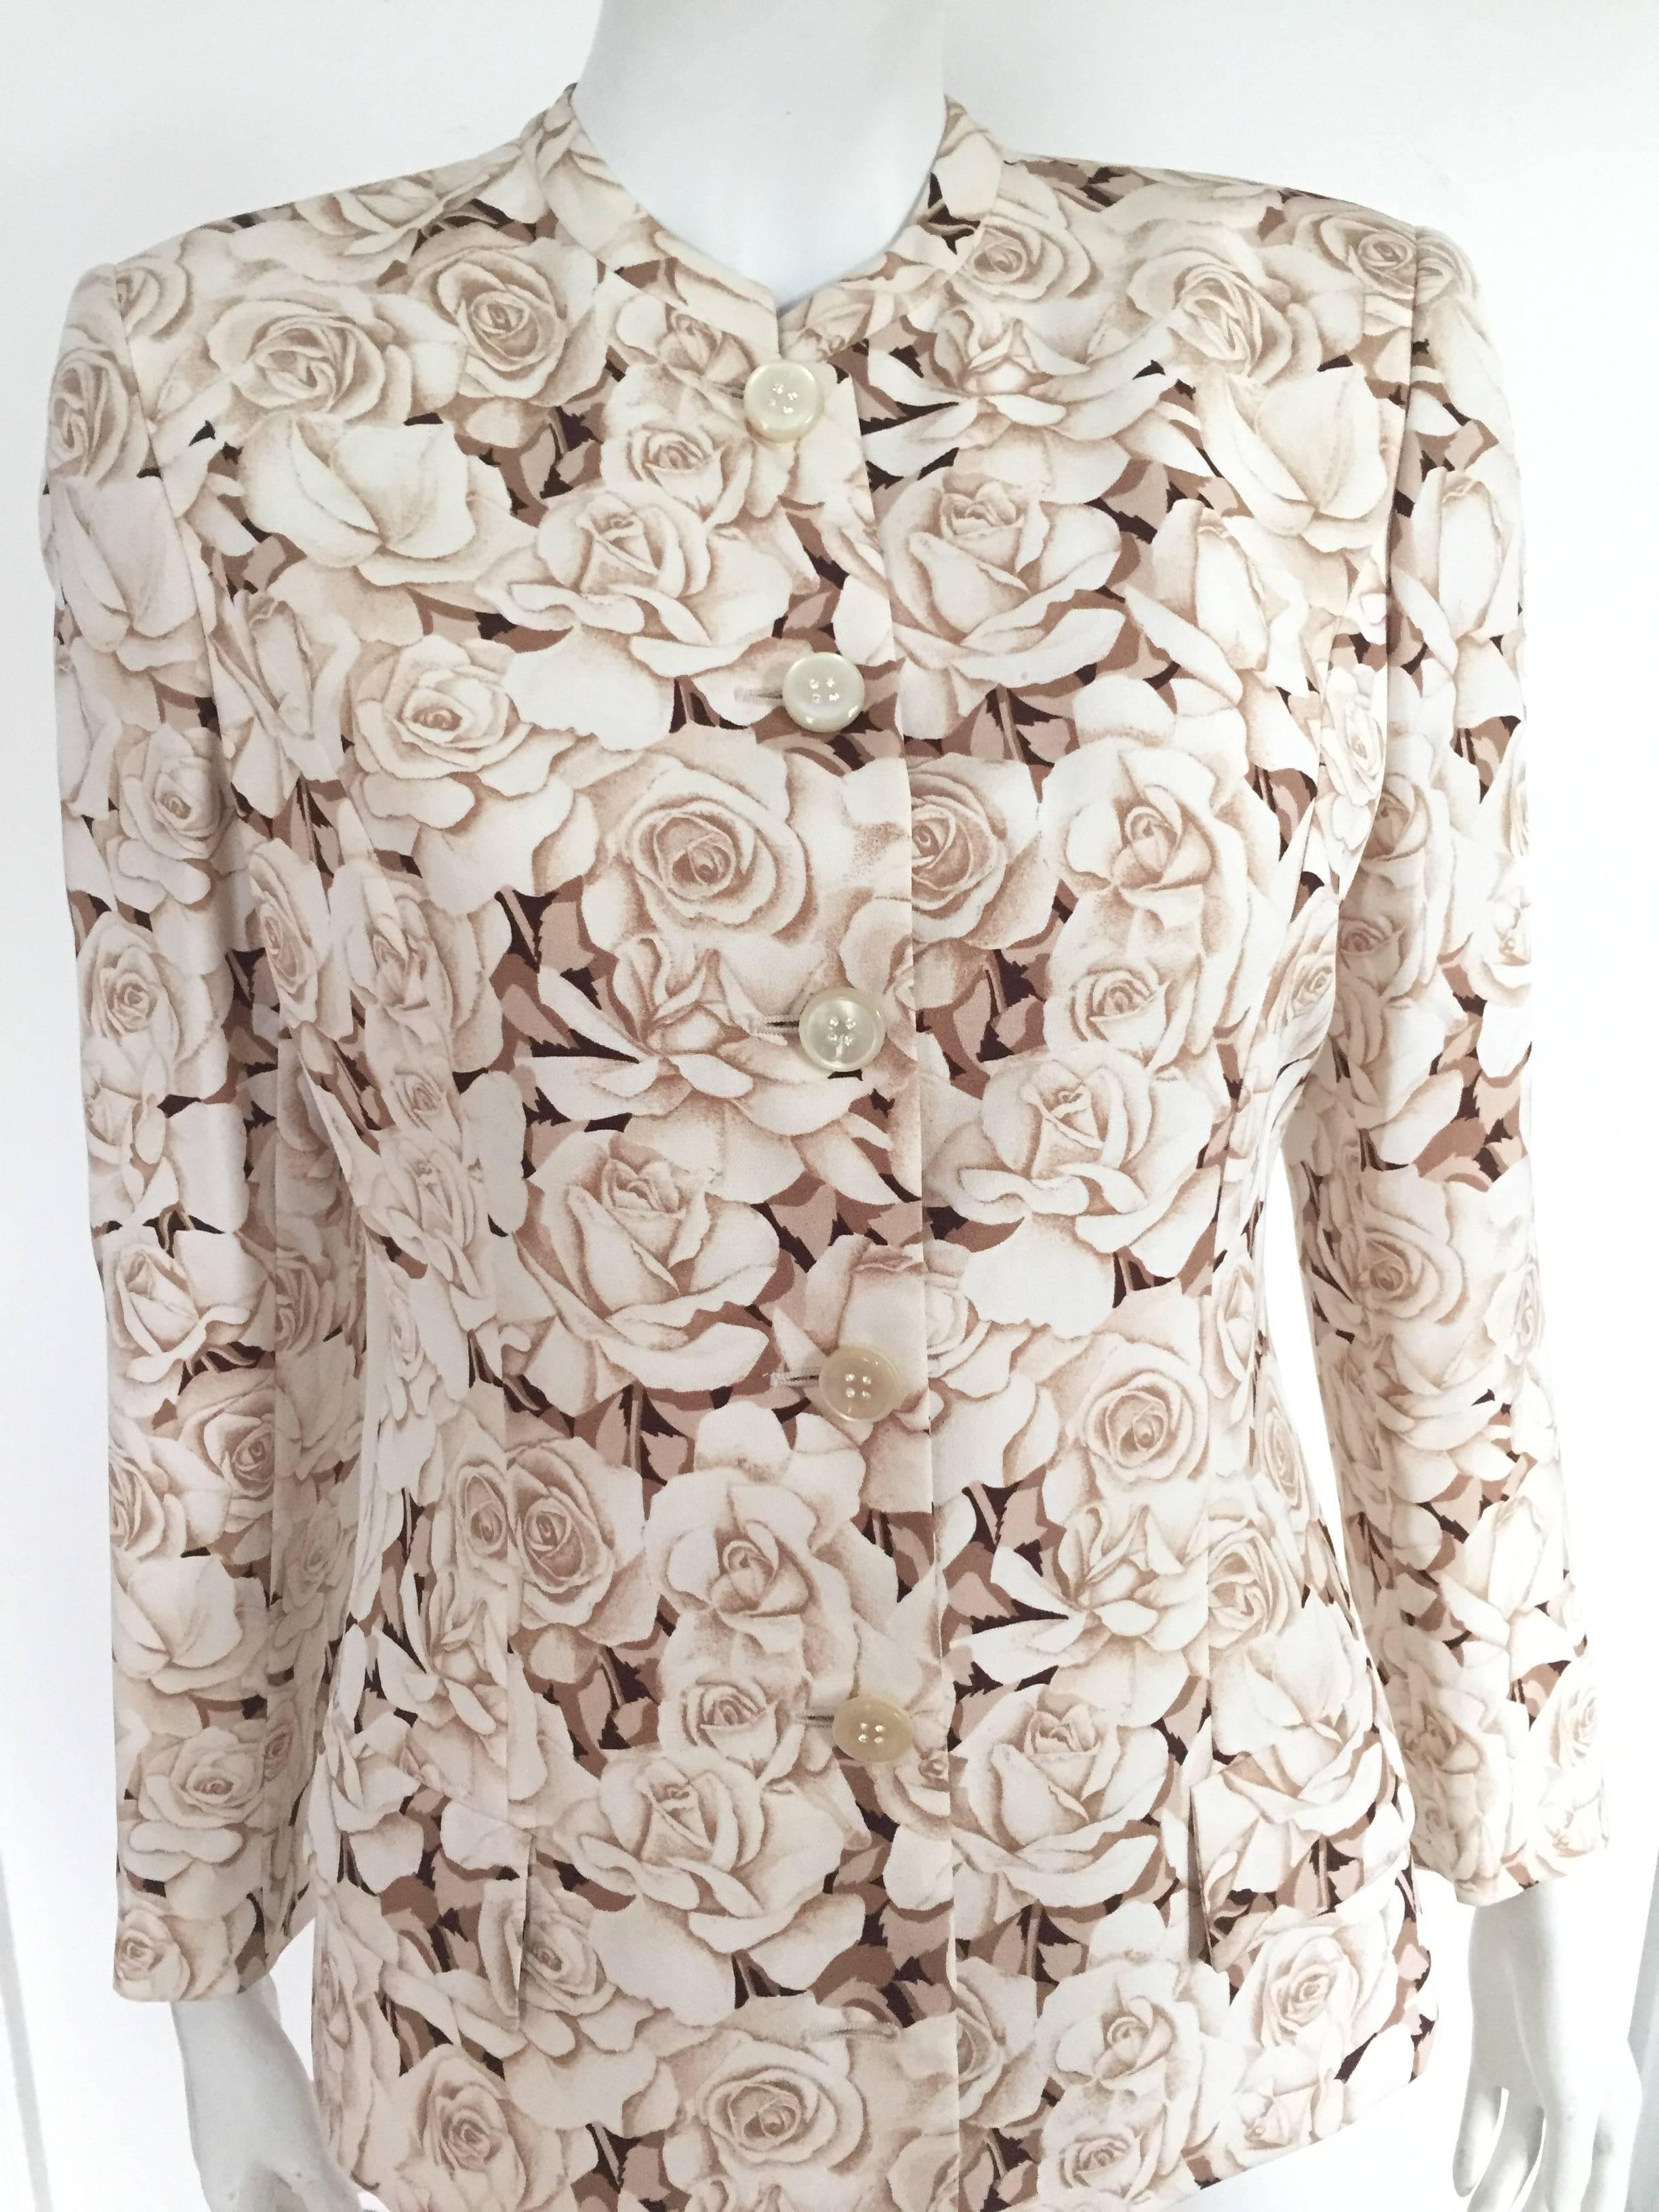 Valentino Miss V 1990s silk rose pattern collarless jacket is an USA size 6.  Please see & use the measurements I provide you so that you can properly measure your body. There are 5 buttons and jacket is lined. This eye catching jacket would